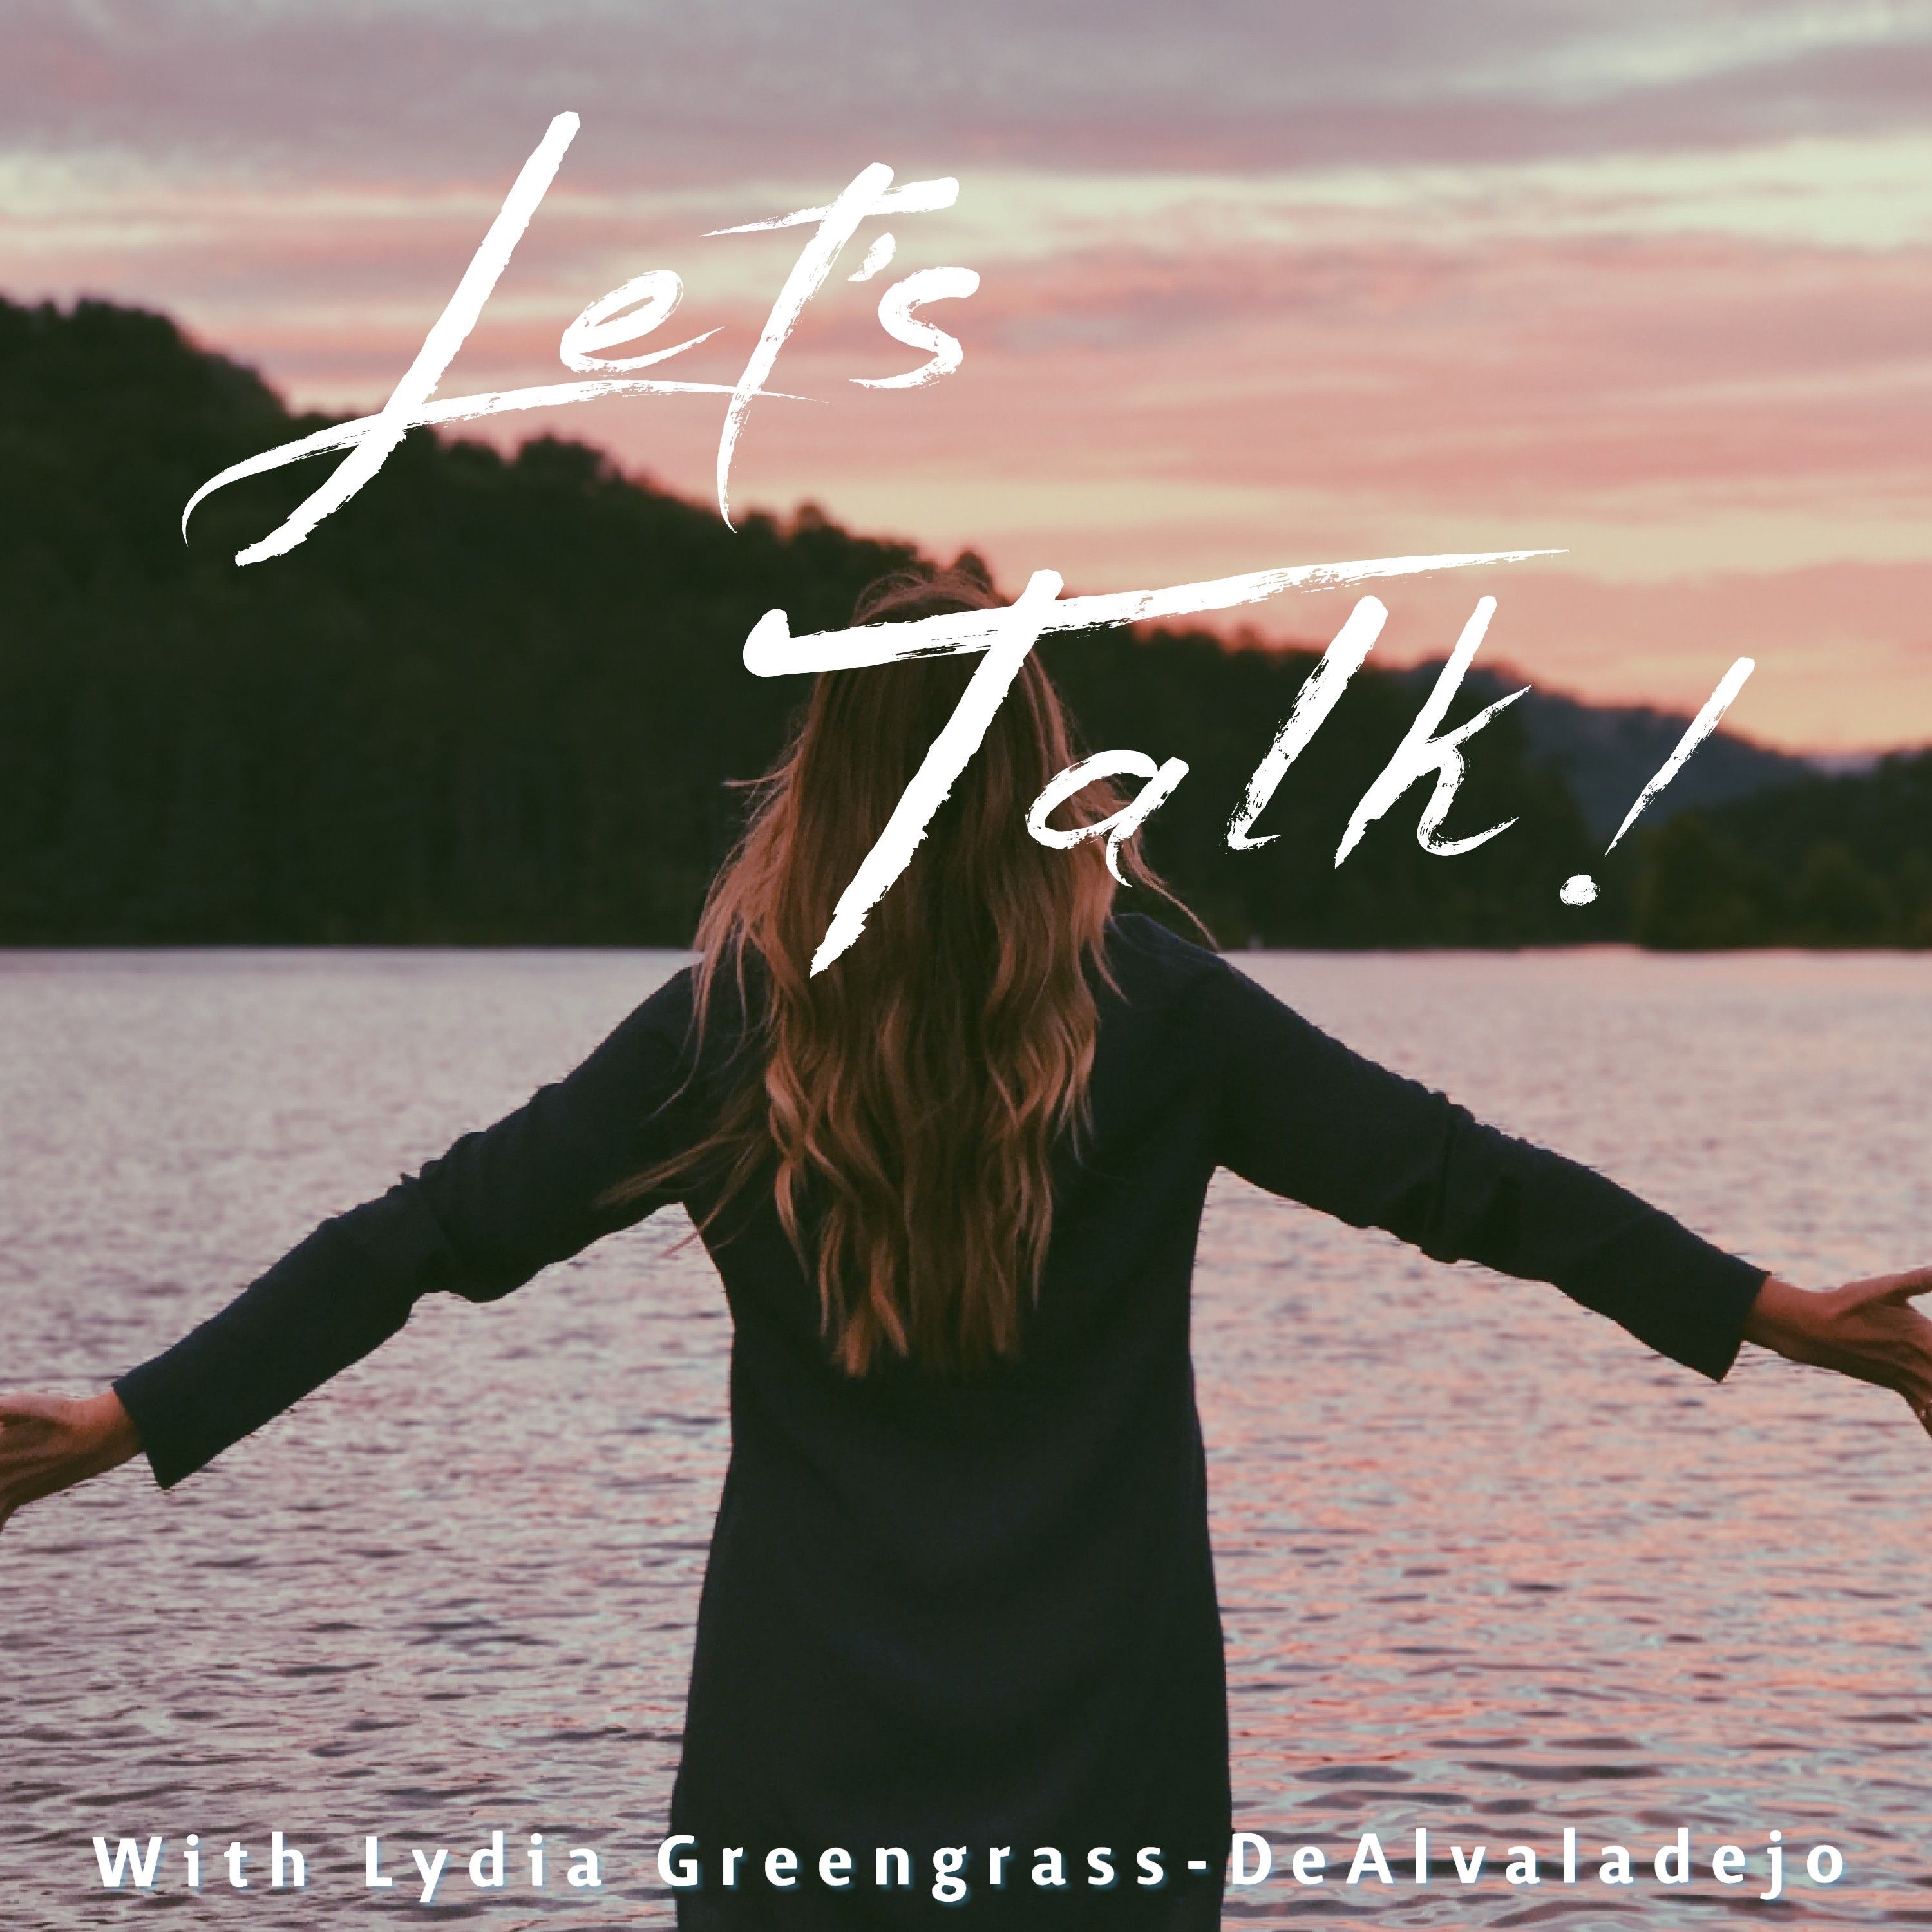 NEW EARIOS COMEDY SERIES! Let's Talk with Lydia Greengrass-DeAlvaladejo